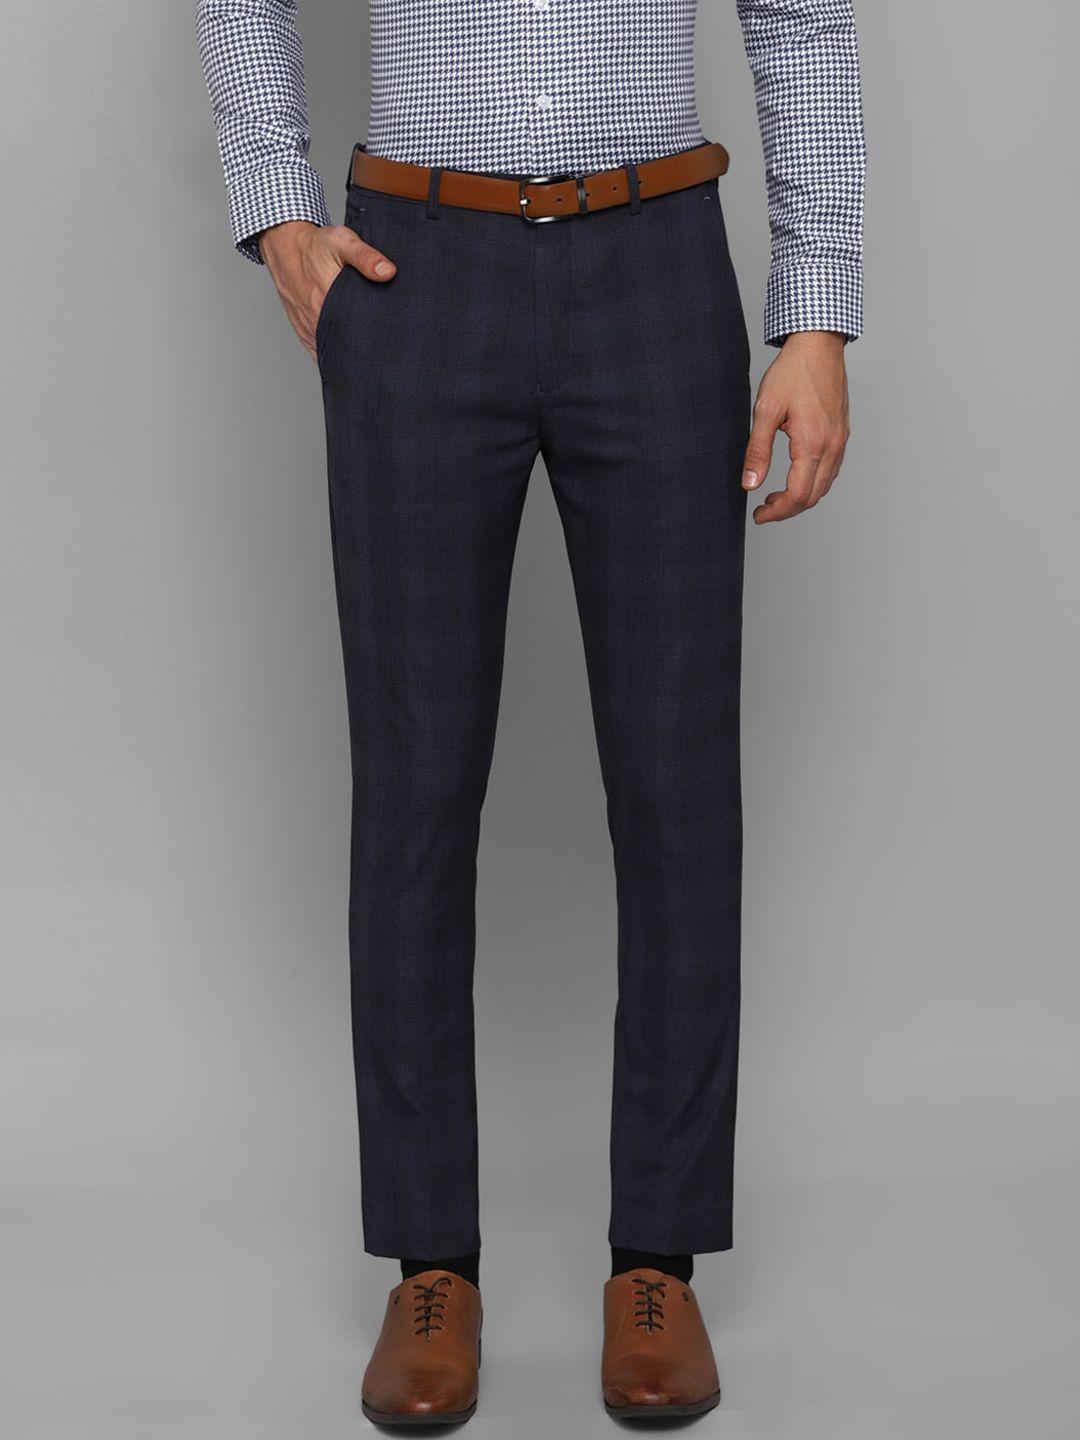 louis philippe men navy blue checked trousers